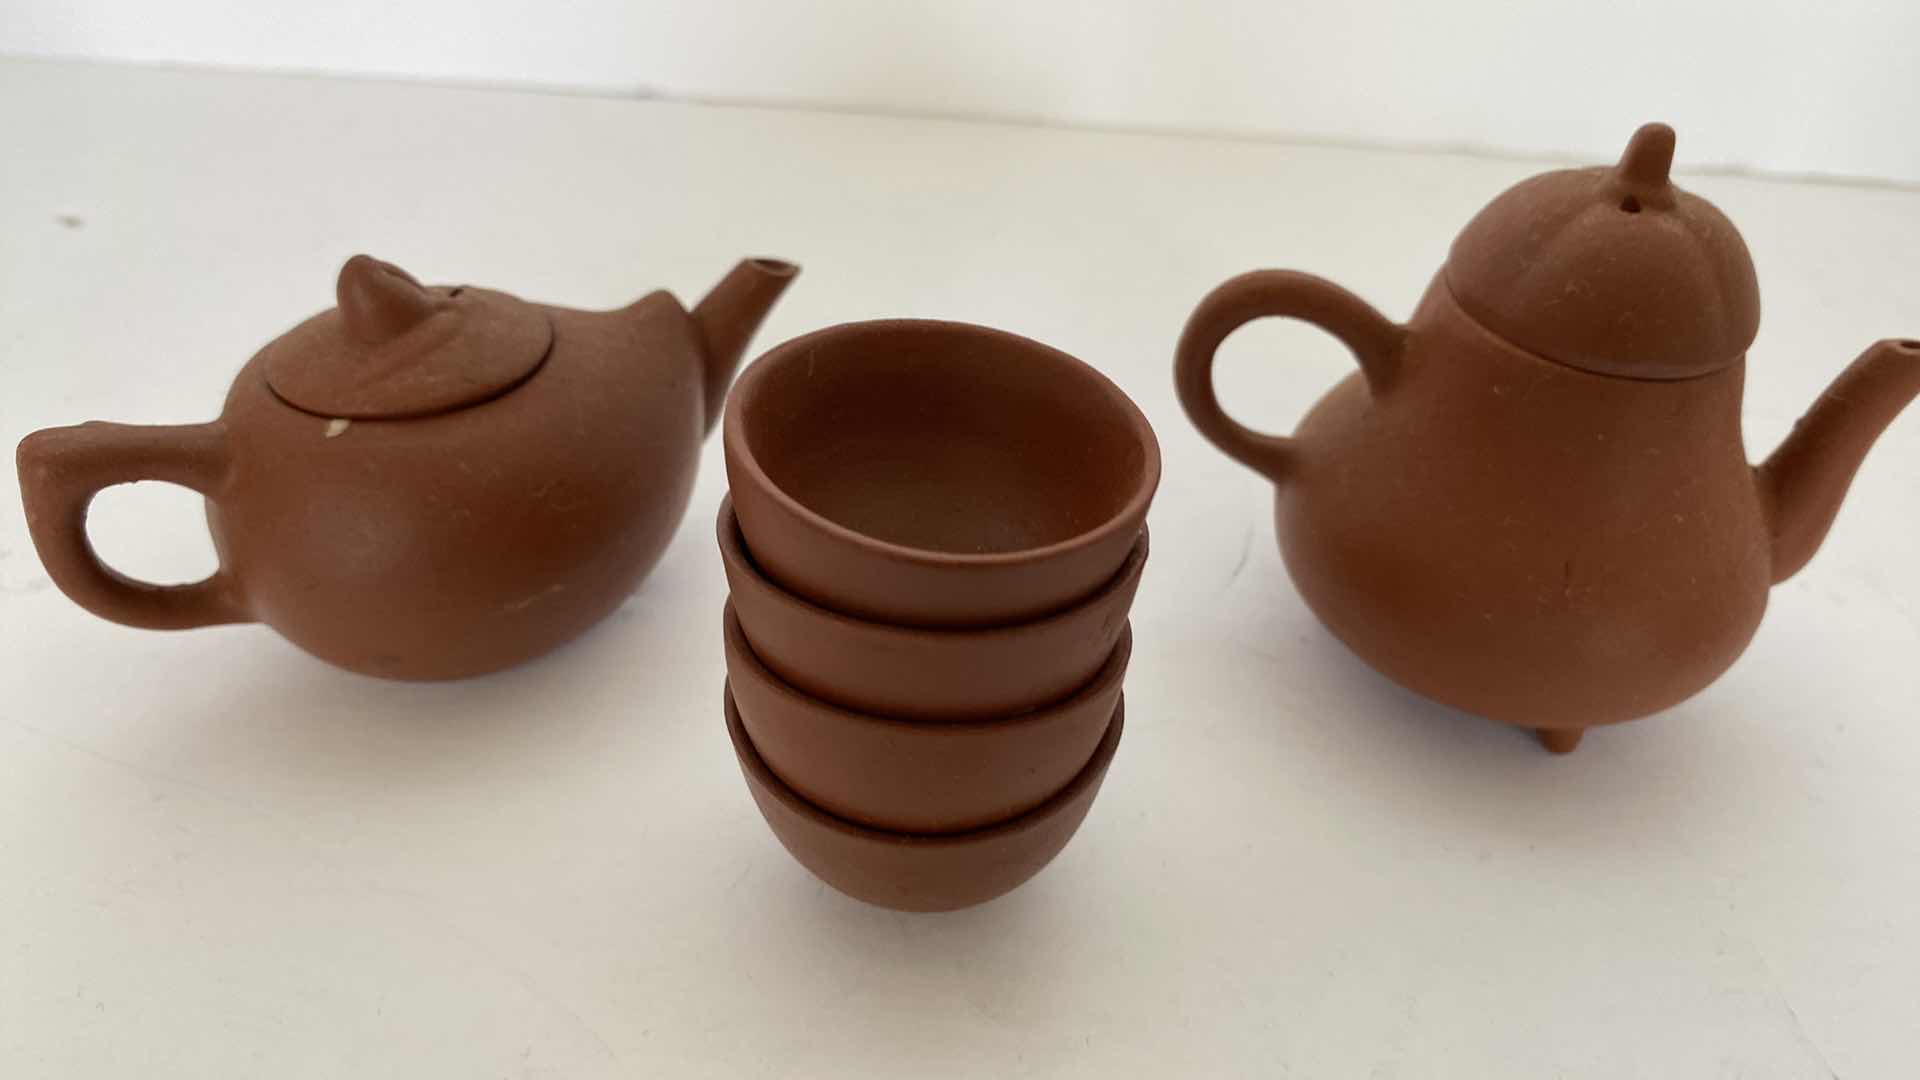 Photo 2 of PAIR OF VINTAGE CHINESE COLLECTIBLE CLAY TEA POTS WITH 4 TEA CUPS LARGEST TEAPOT 3” x 2.25”.